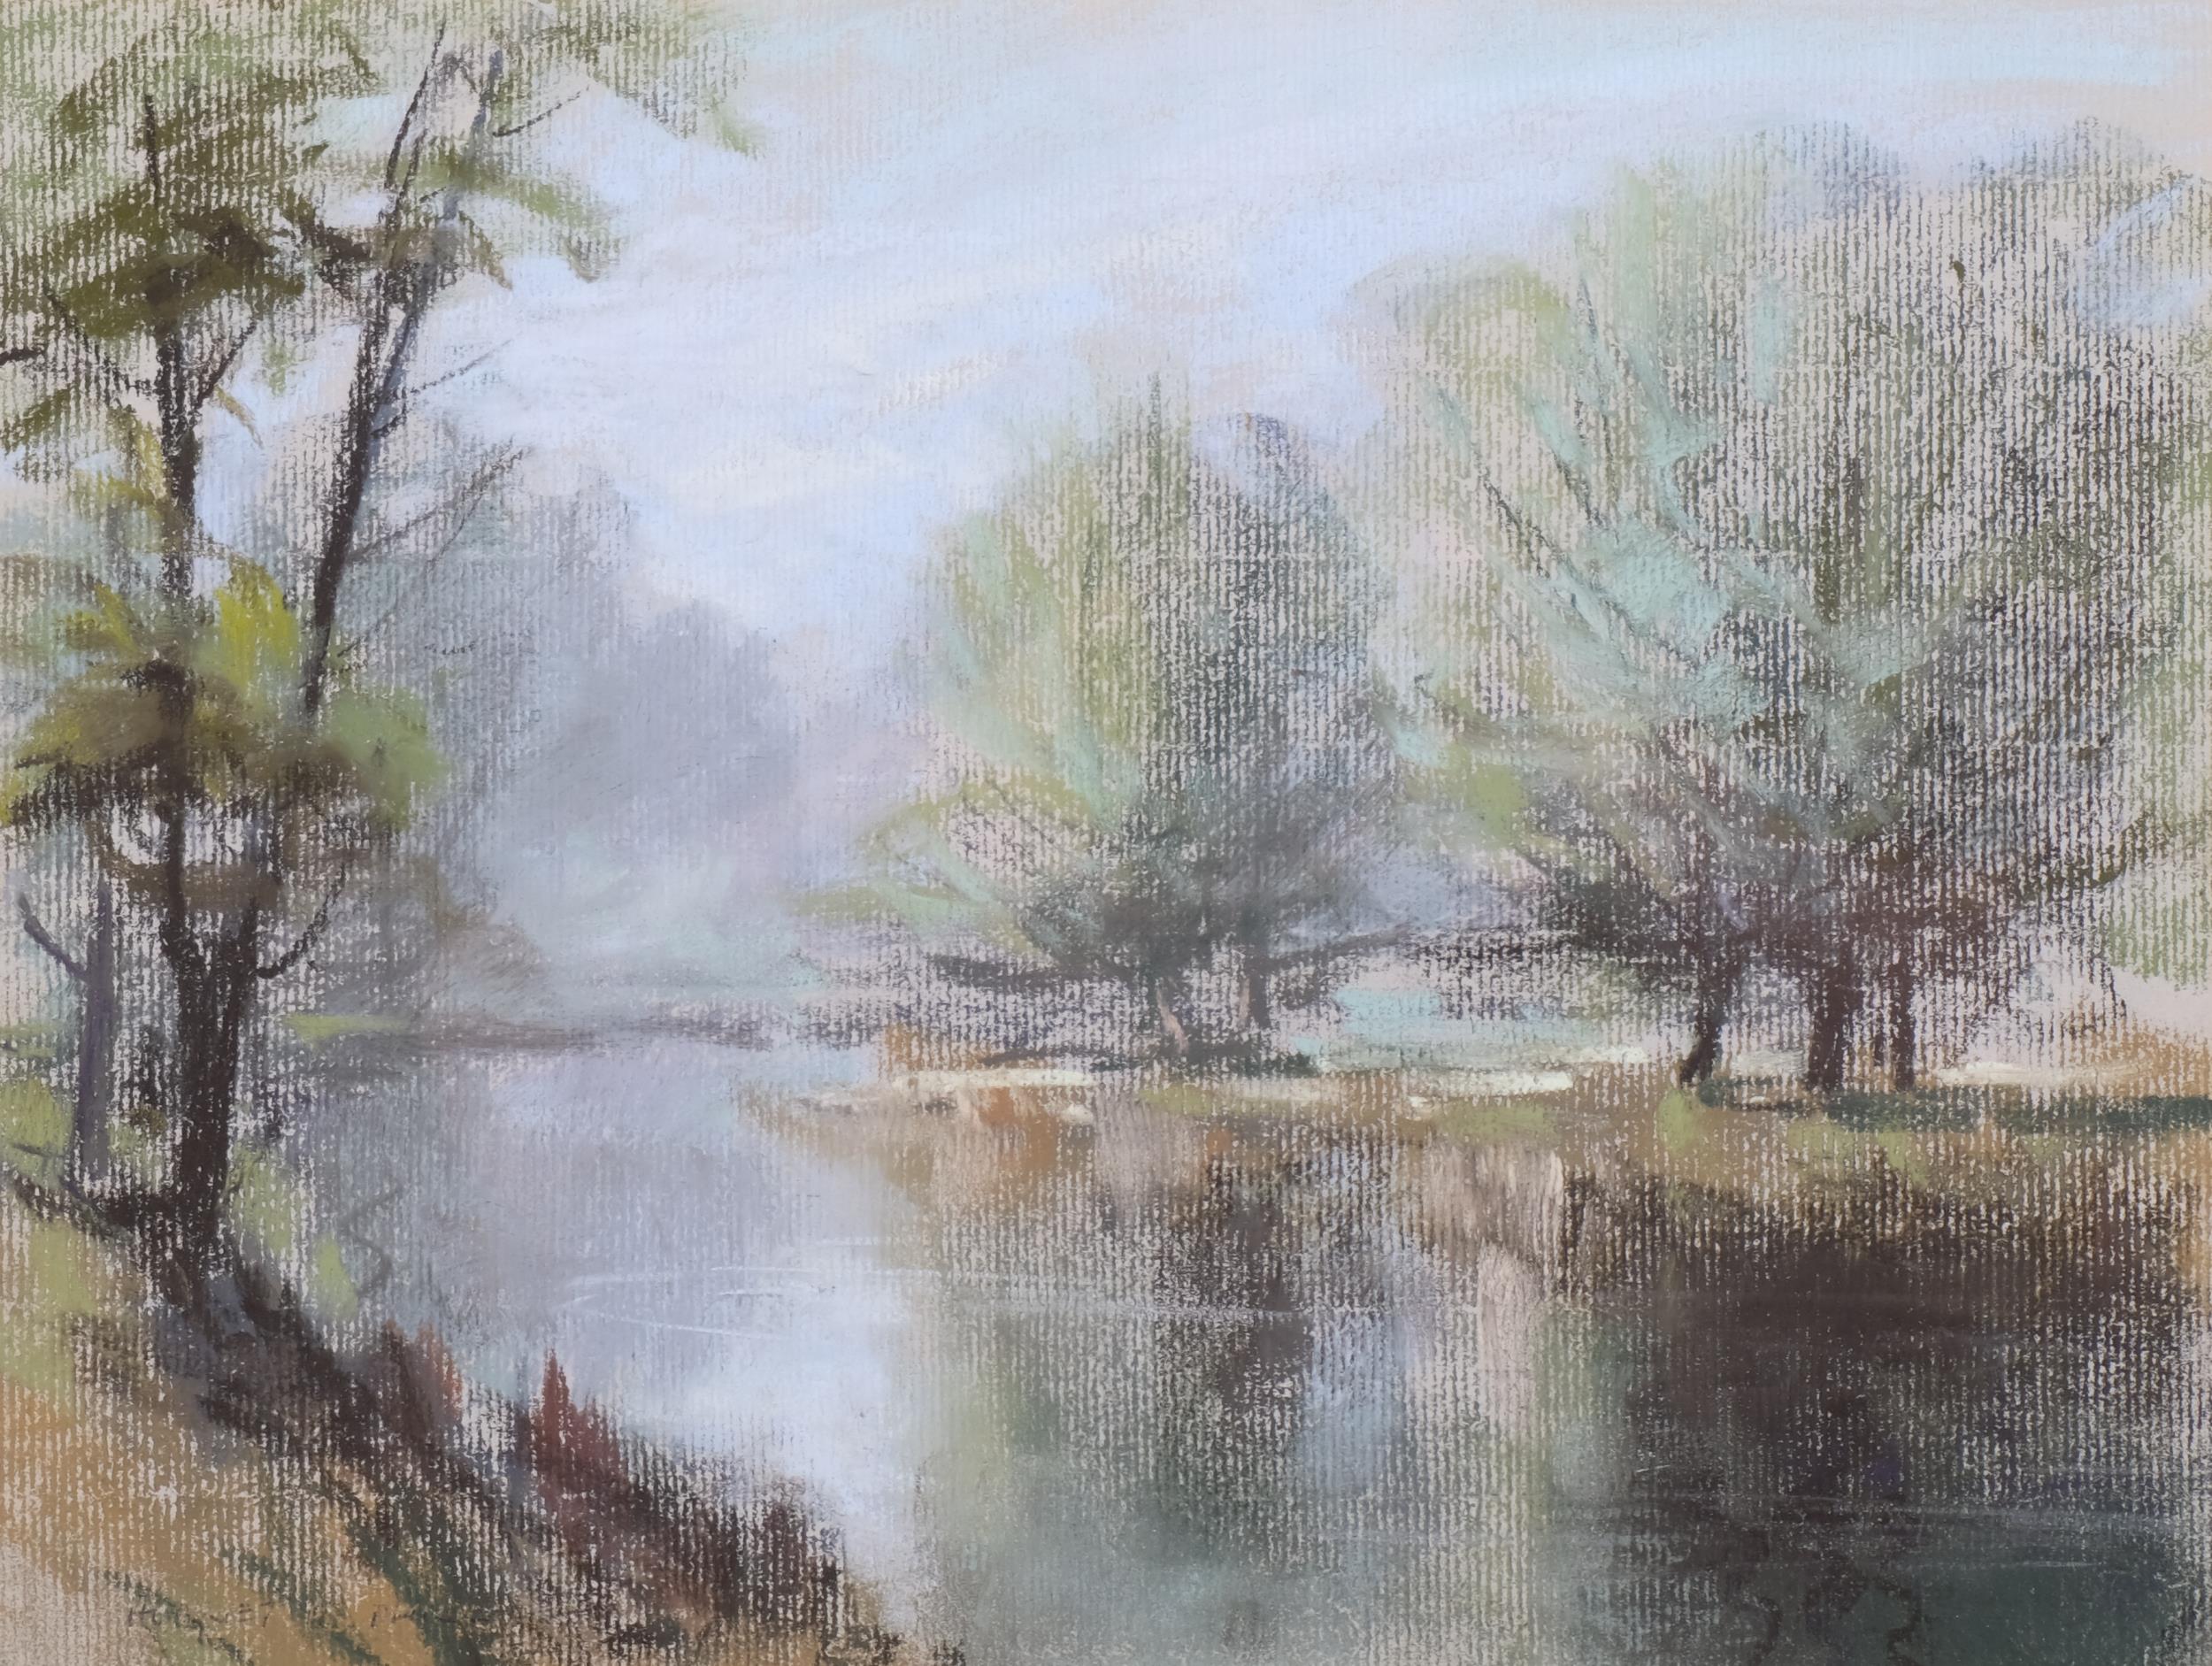 Aubrey Phillips (1920-2005), pastel on paper, Springtime on the Windrush (1984), signed lower